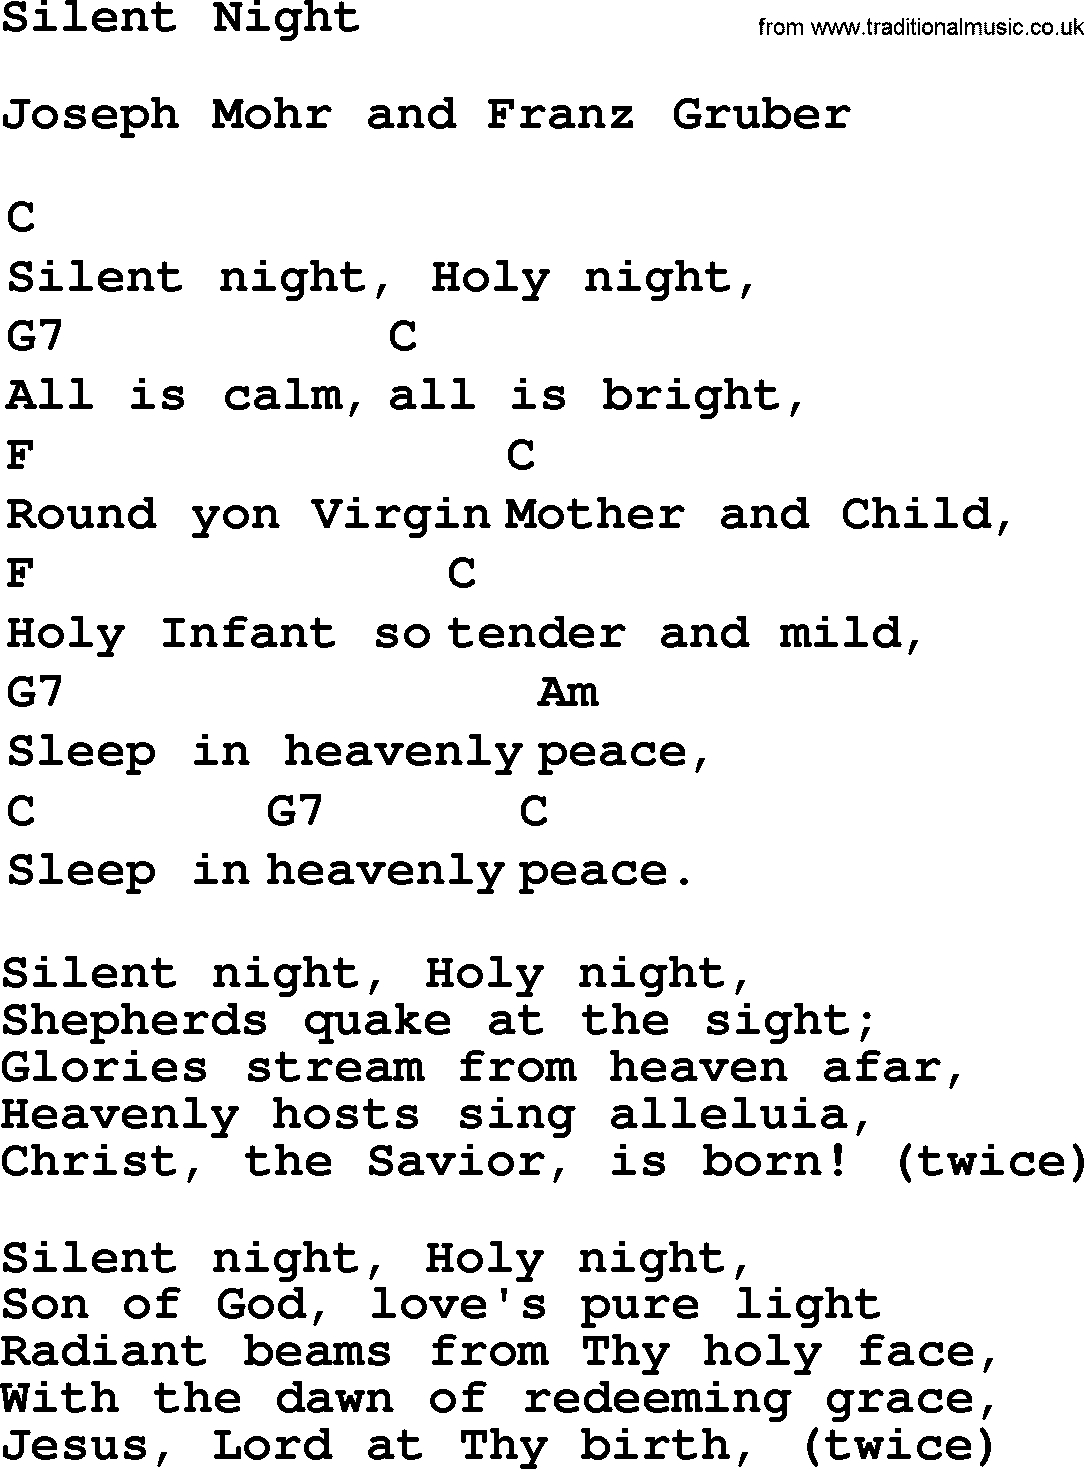 Silent Night Chords Top 1000 Folk And Old Time Songs Collection Silent Night Lyrics